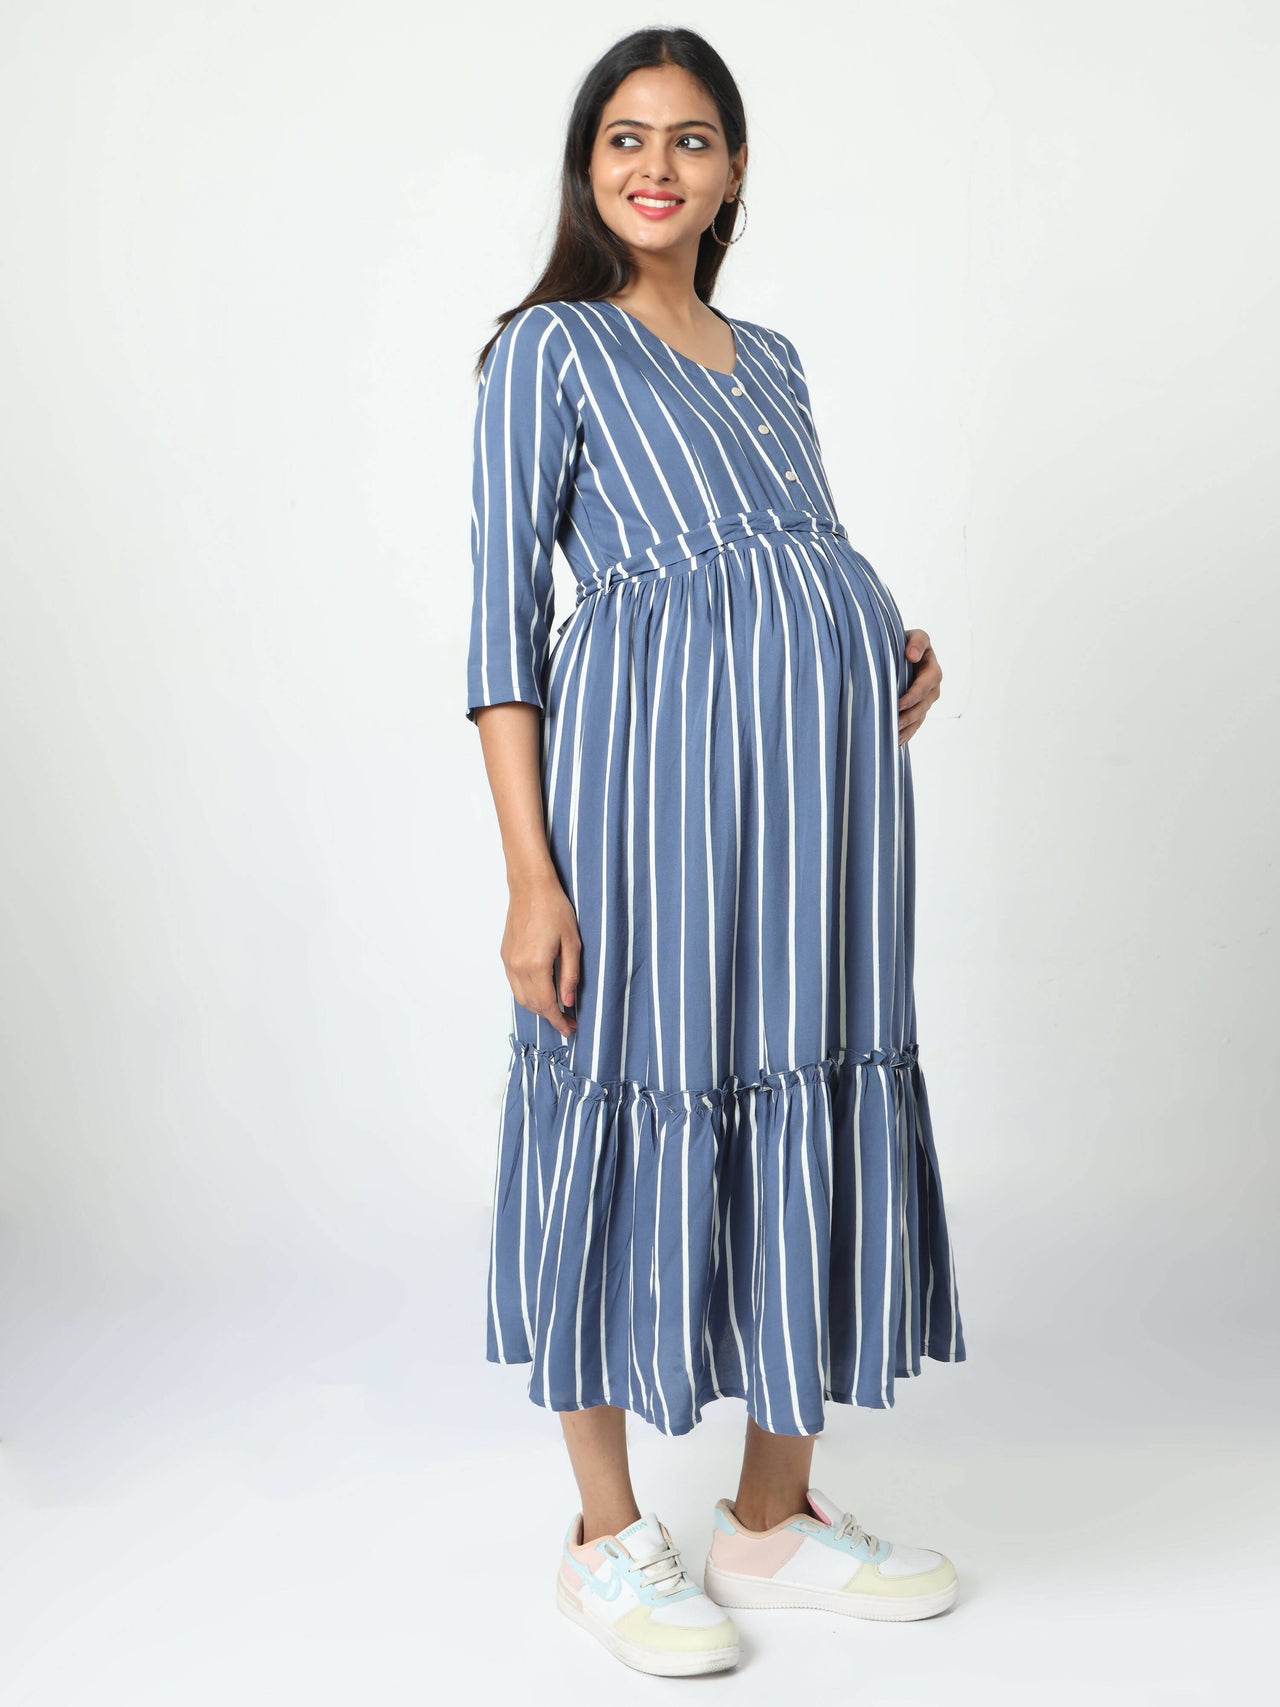 Manet Three Fourth Maternity Dress Striped With Concealed Zipper Nursing Access - Blue - Distacart